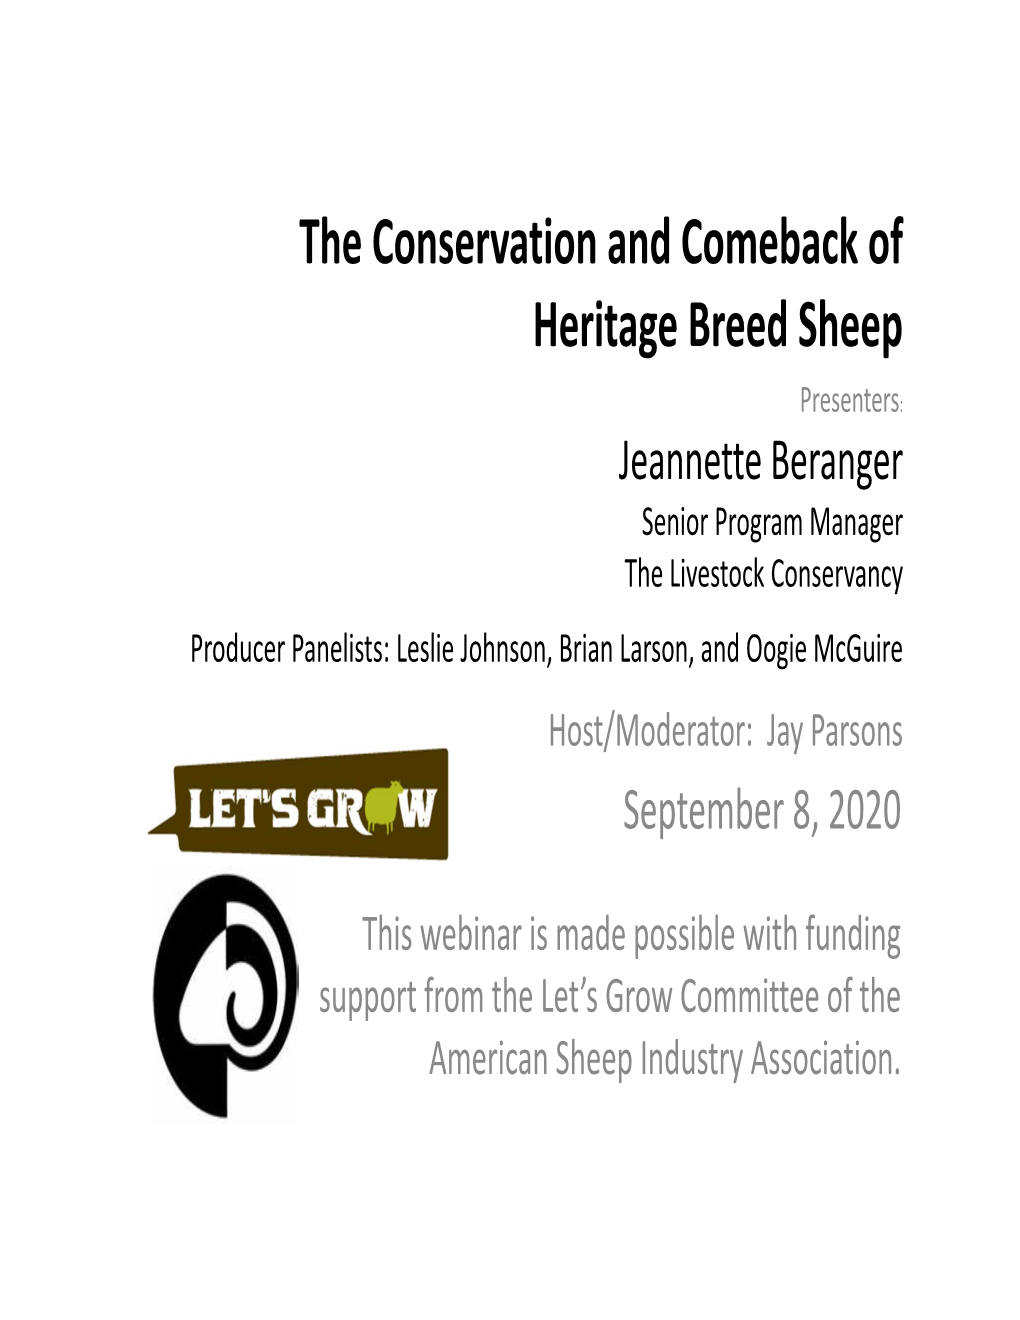 The Conservation and Comeback of Heritage Breed Sheep